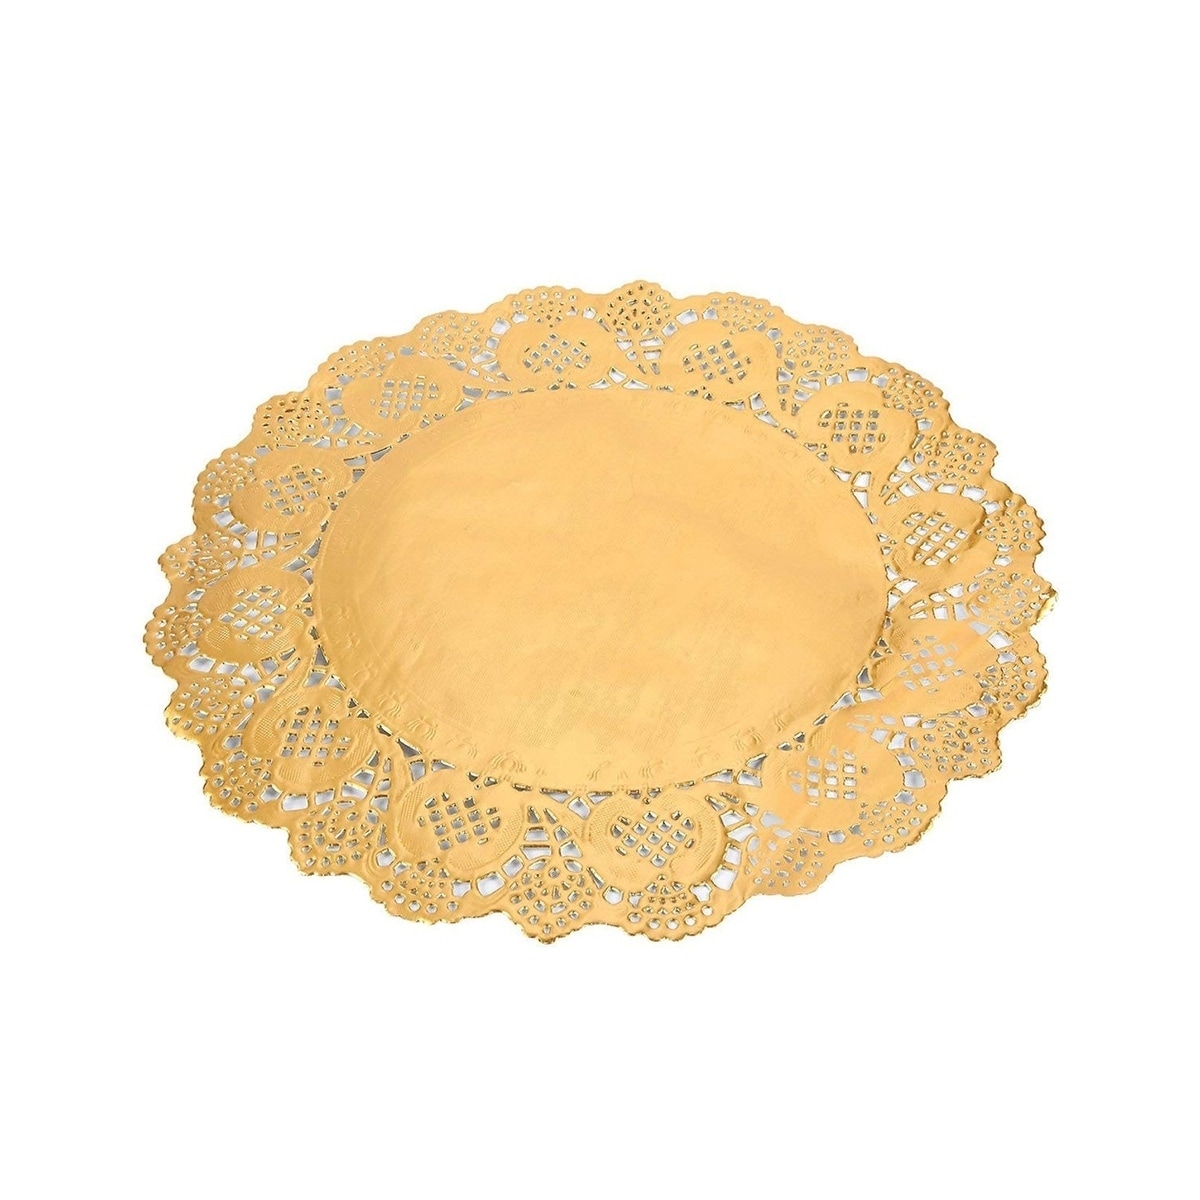 60-Pack Round Paper Doily Lace Placemats for Cake Dessert, Gold 12" in Diameter